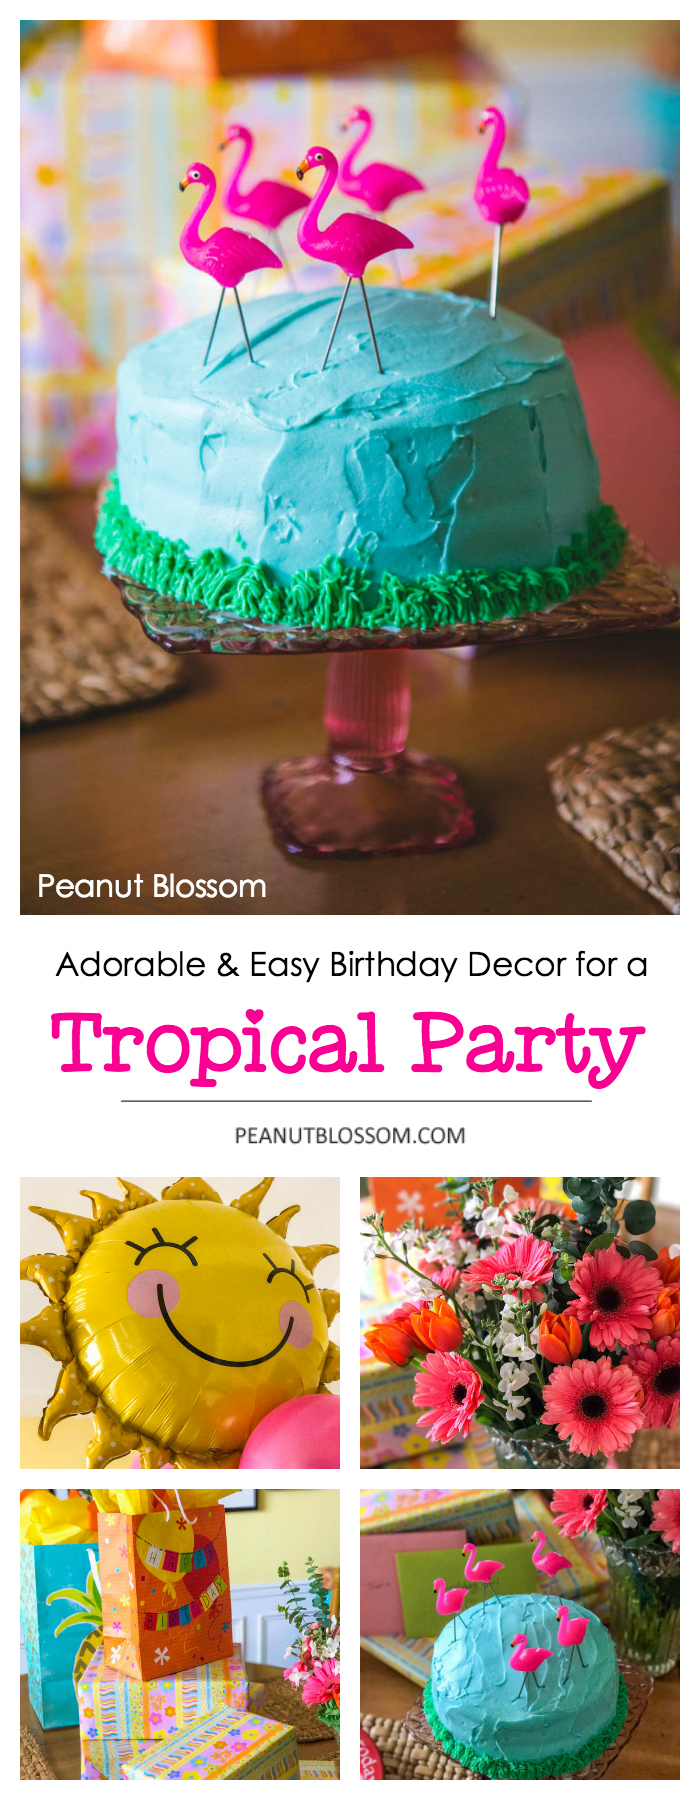 Turning 10 with a pink flamingo tropical party